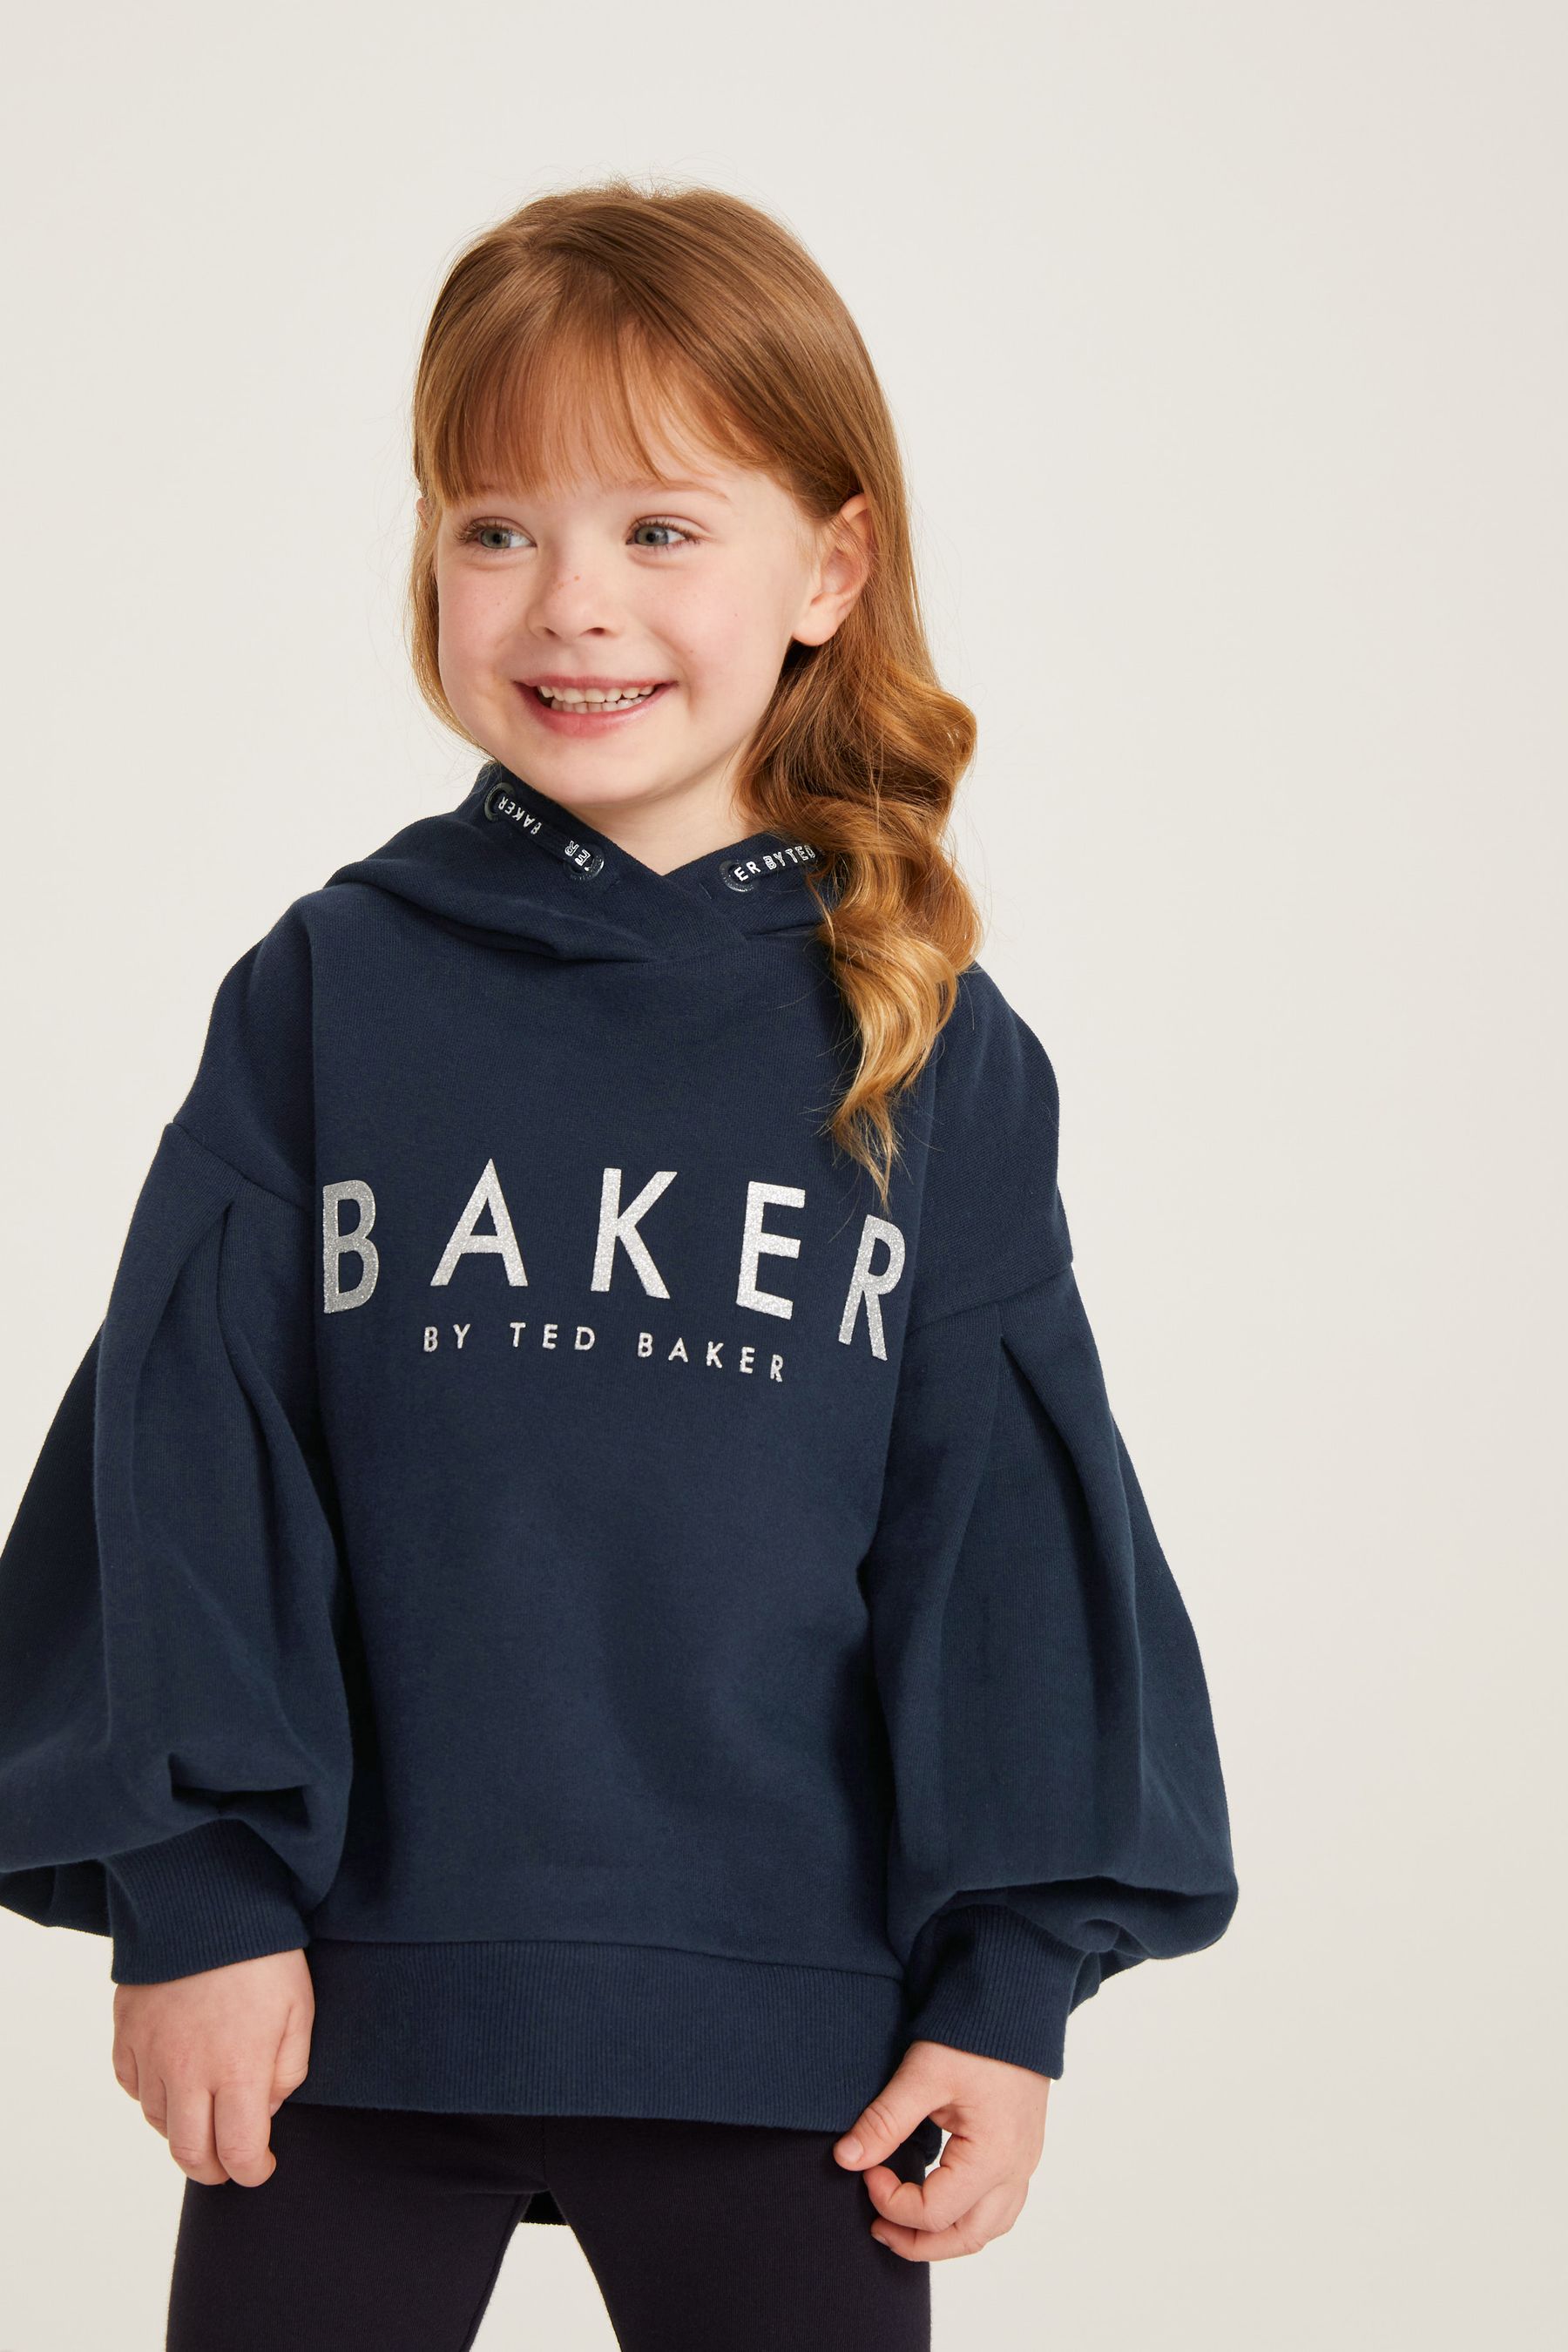 Buy Baker by Ted Baker Logo Hoodie from the Next UK online shop